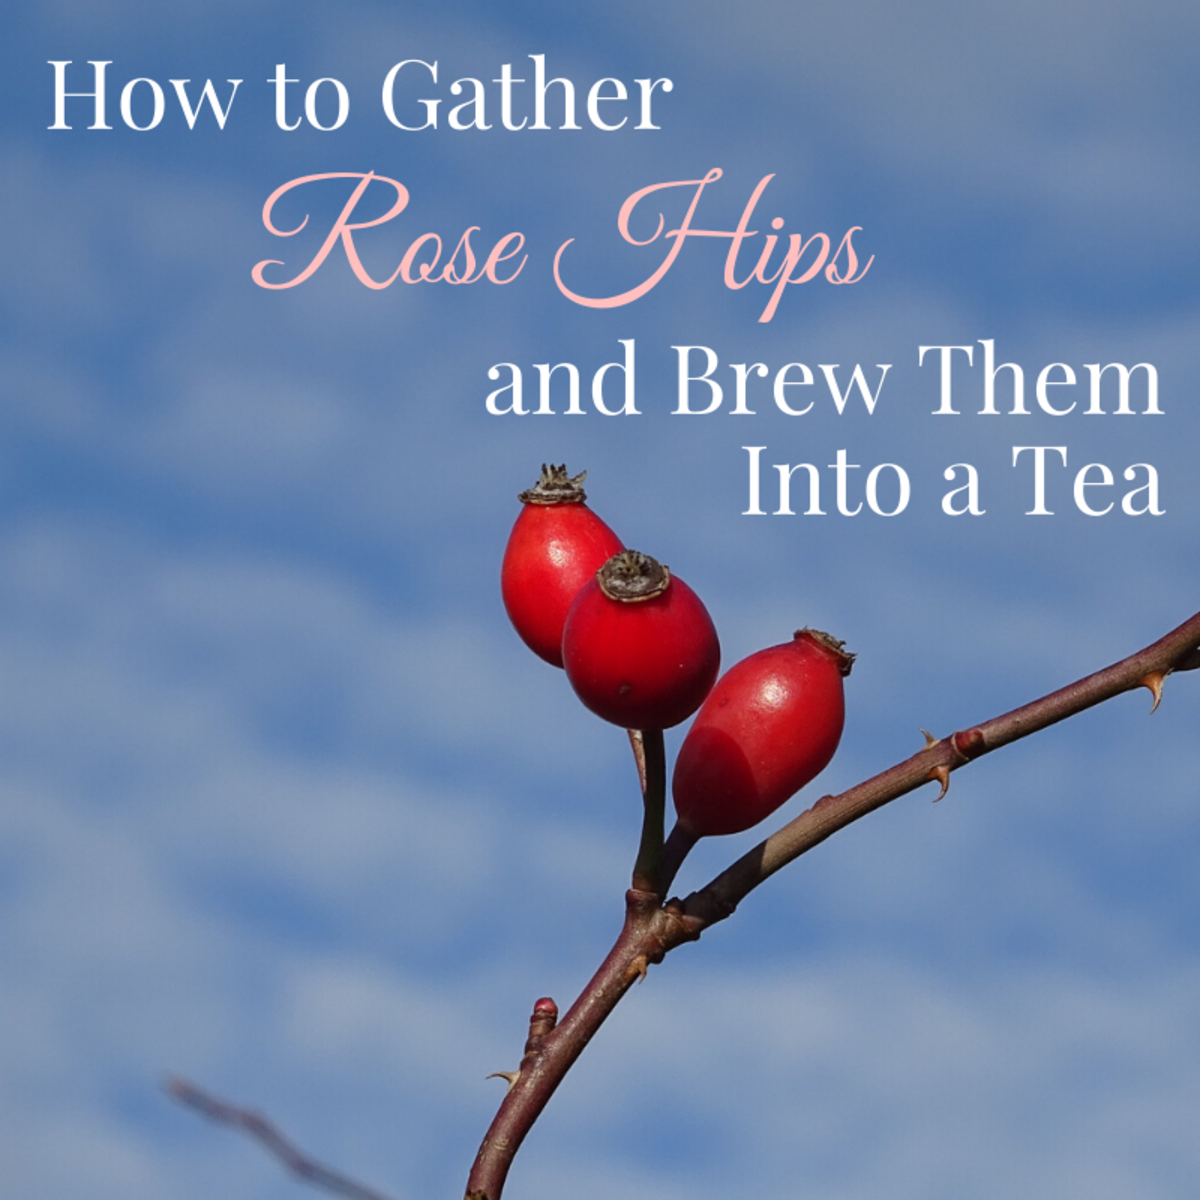 How To Gather Rose Hips And Make Them Into Tea Delishably